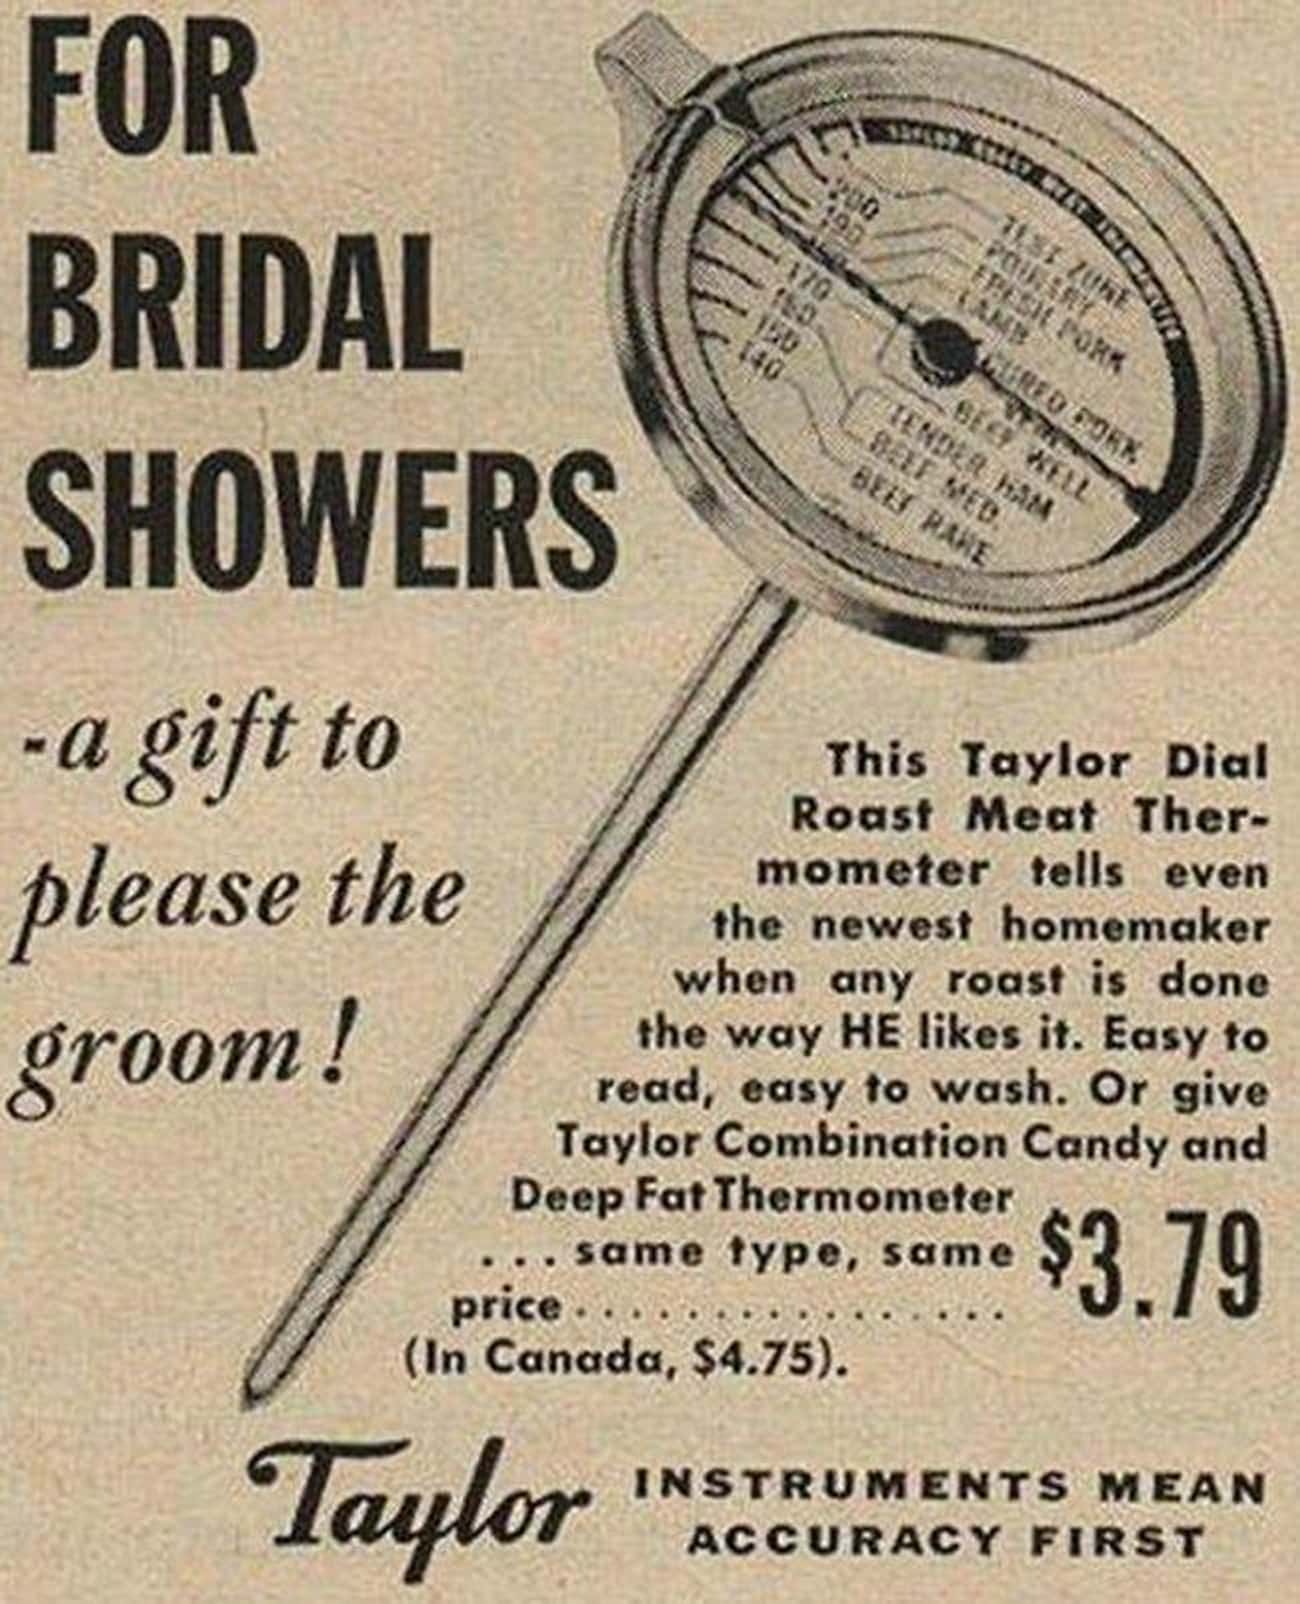 'A Gift To Please The Groom!'